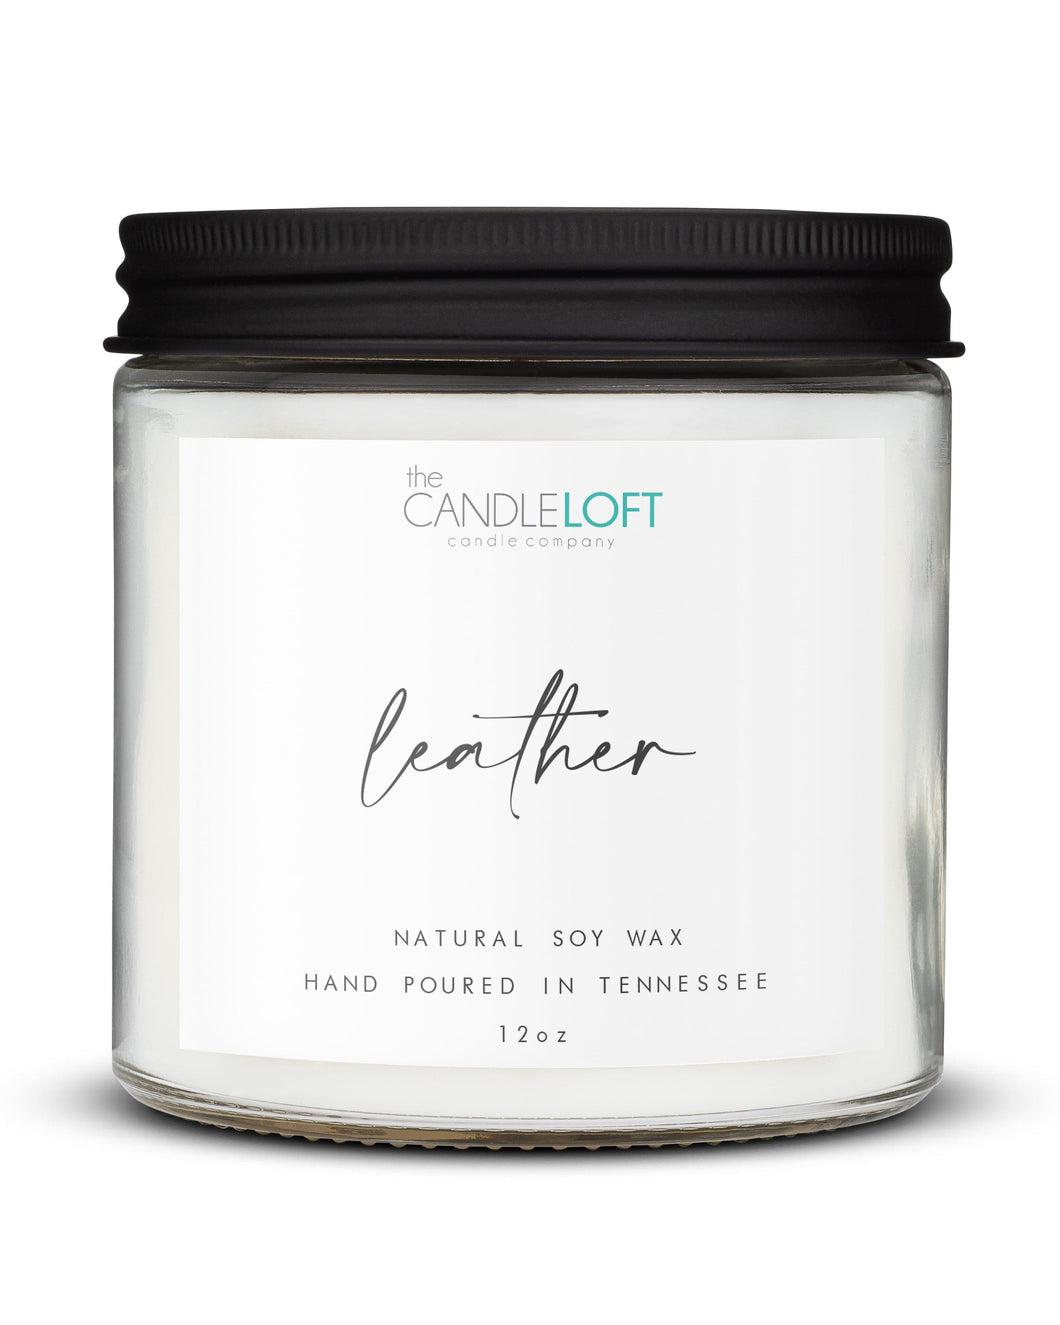 The Candle Loft Candles Signature 12oz Leather Candle